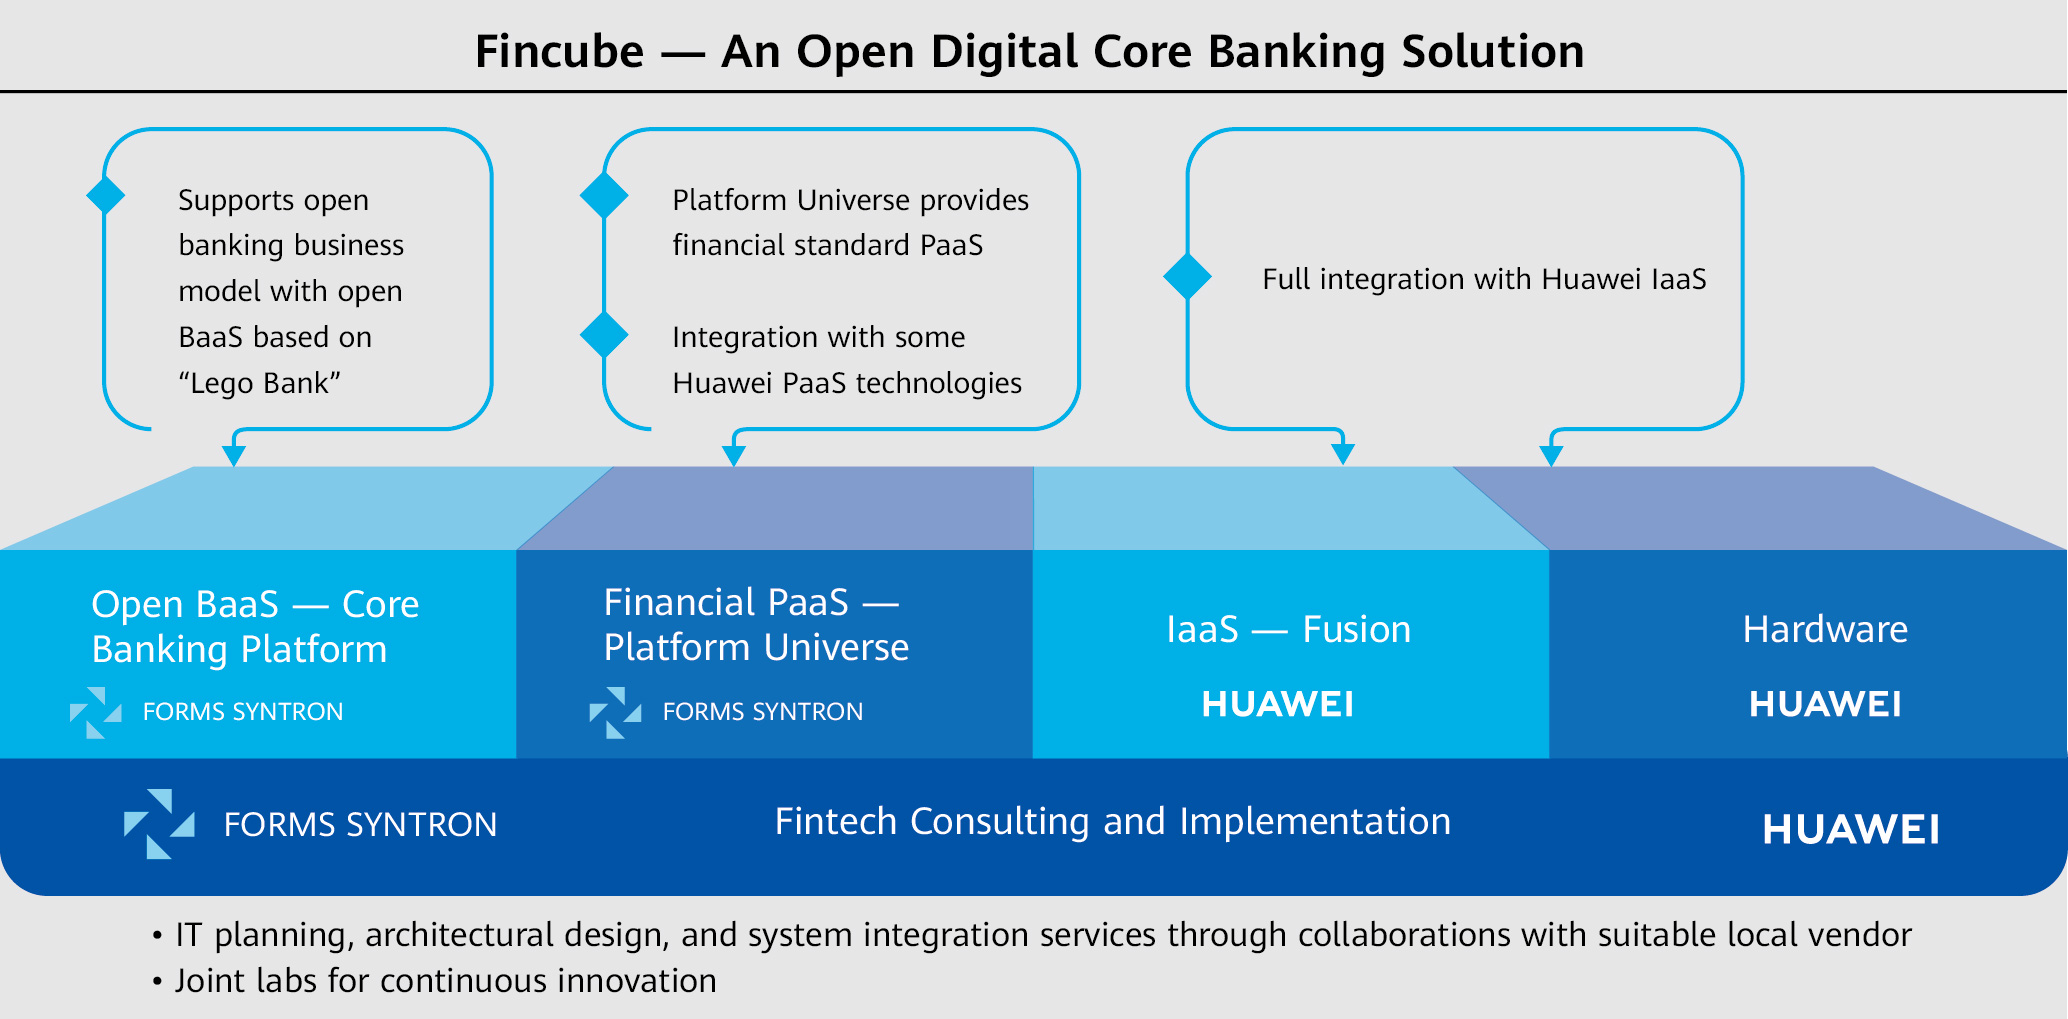 A diagram about open digital core banking solution Fincube for Huawei's ICT Insights magazine